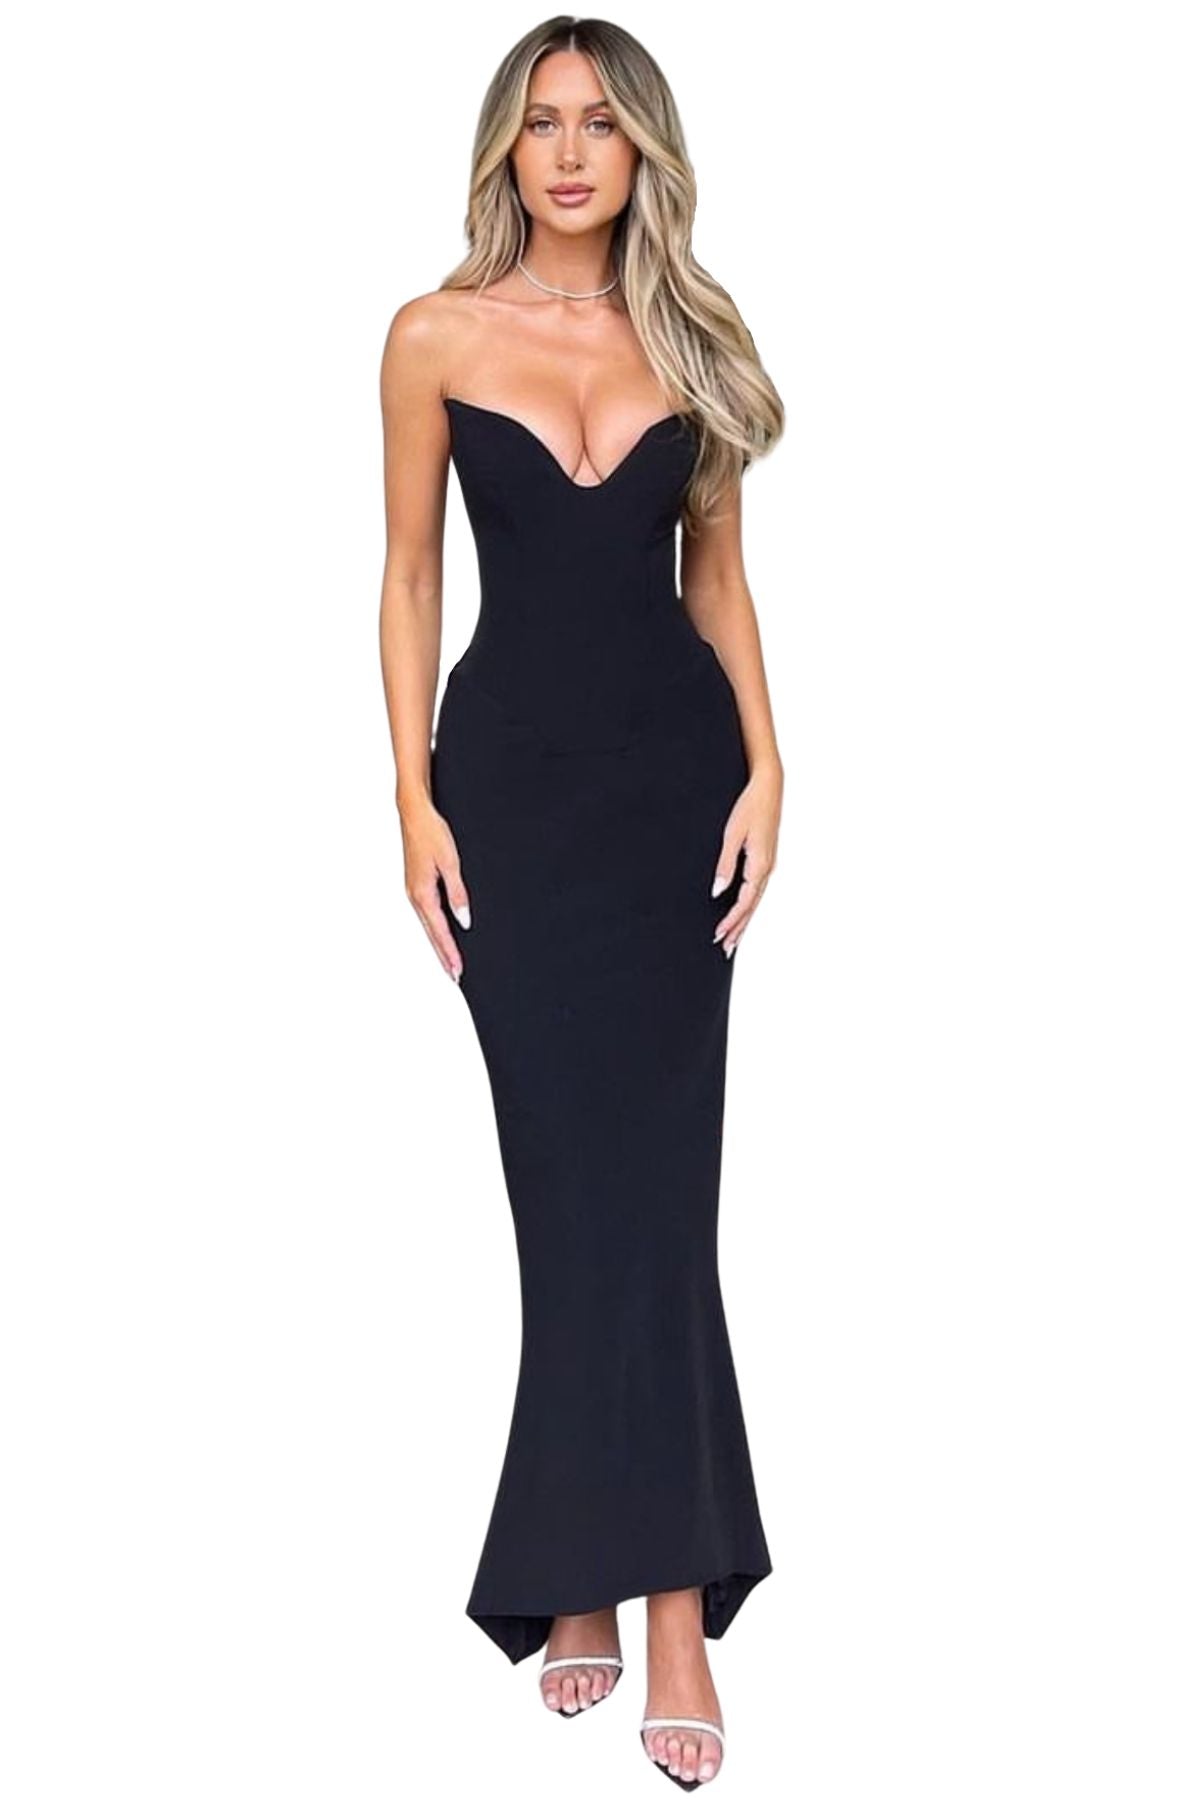 Rent HOUSE OF CB Sabine Strapless Corset Dress (Black) - Rent this